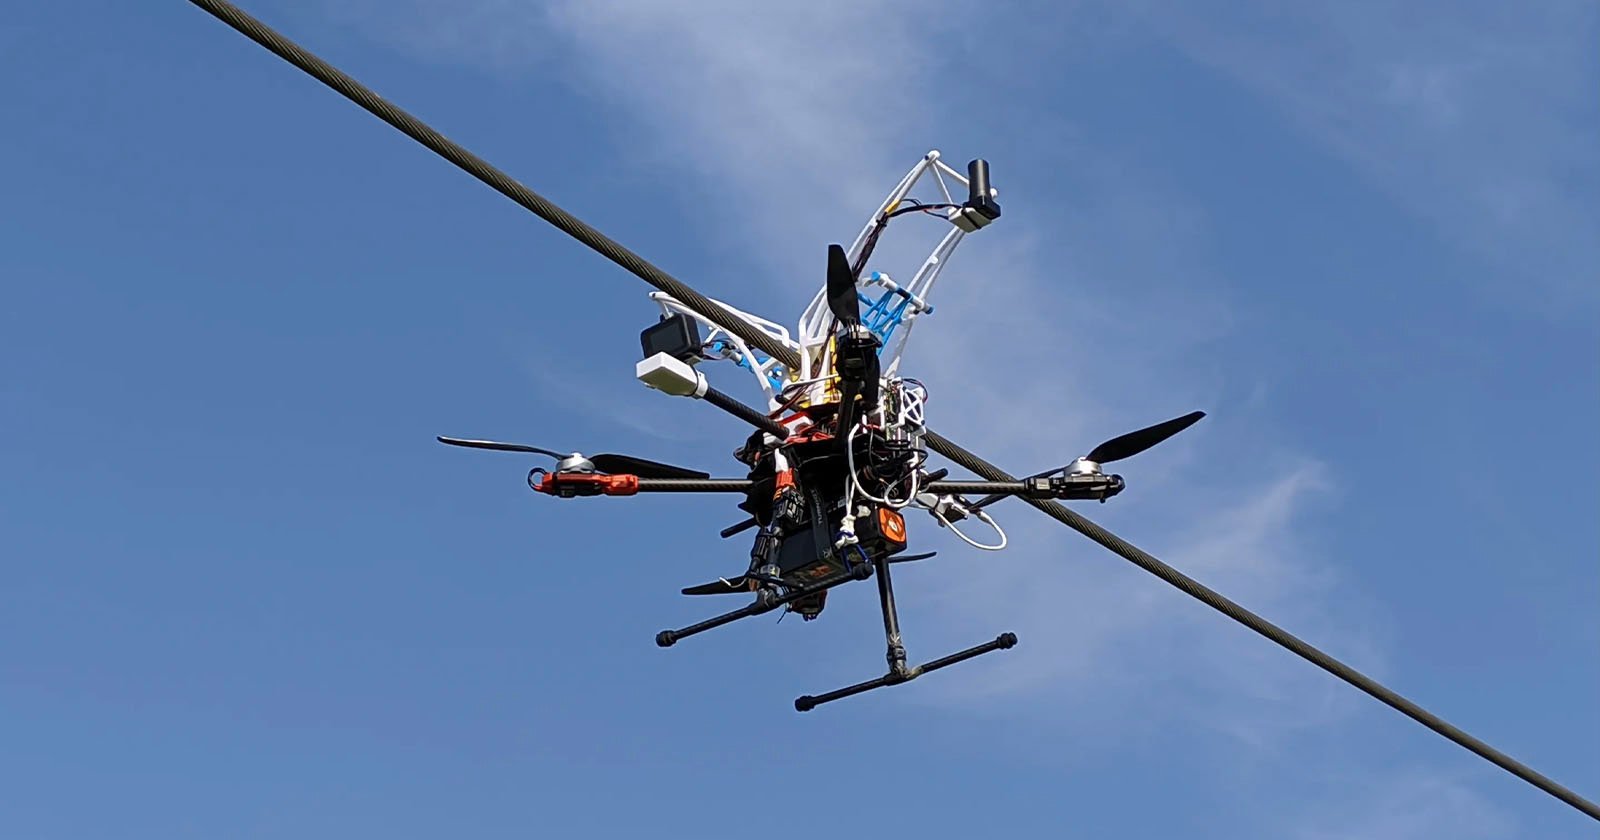 Drones Are Using Power Lines to Charge Up, What Could Possibly Go Wrong? [Video]